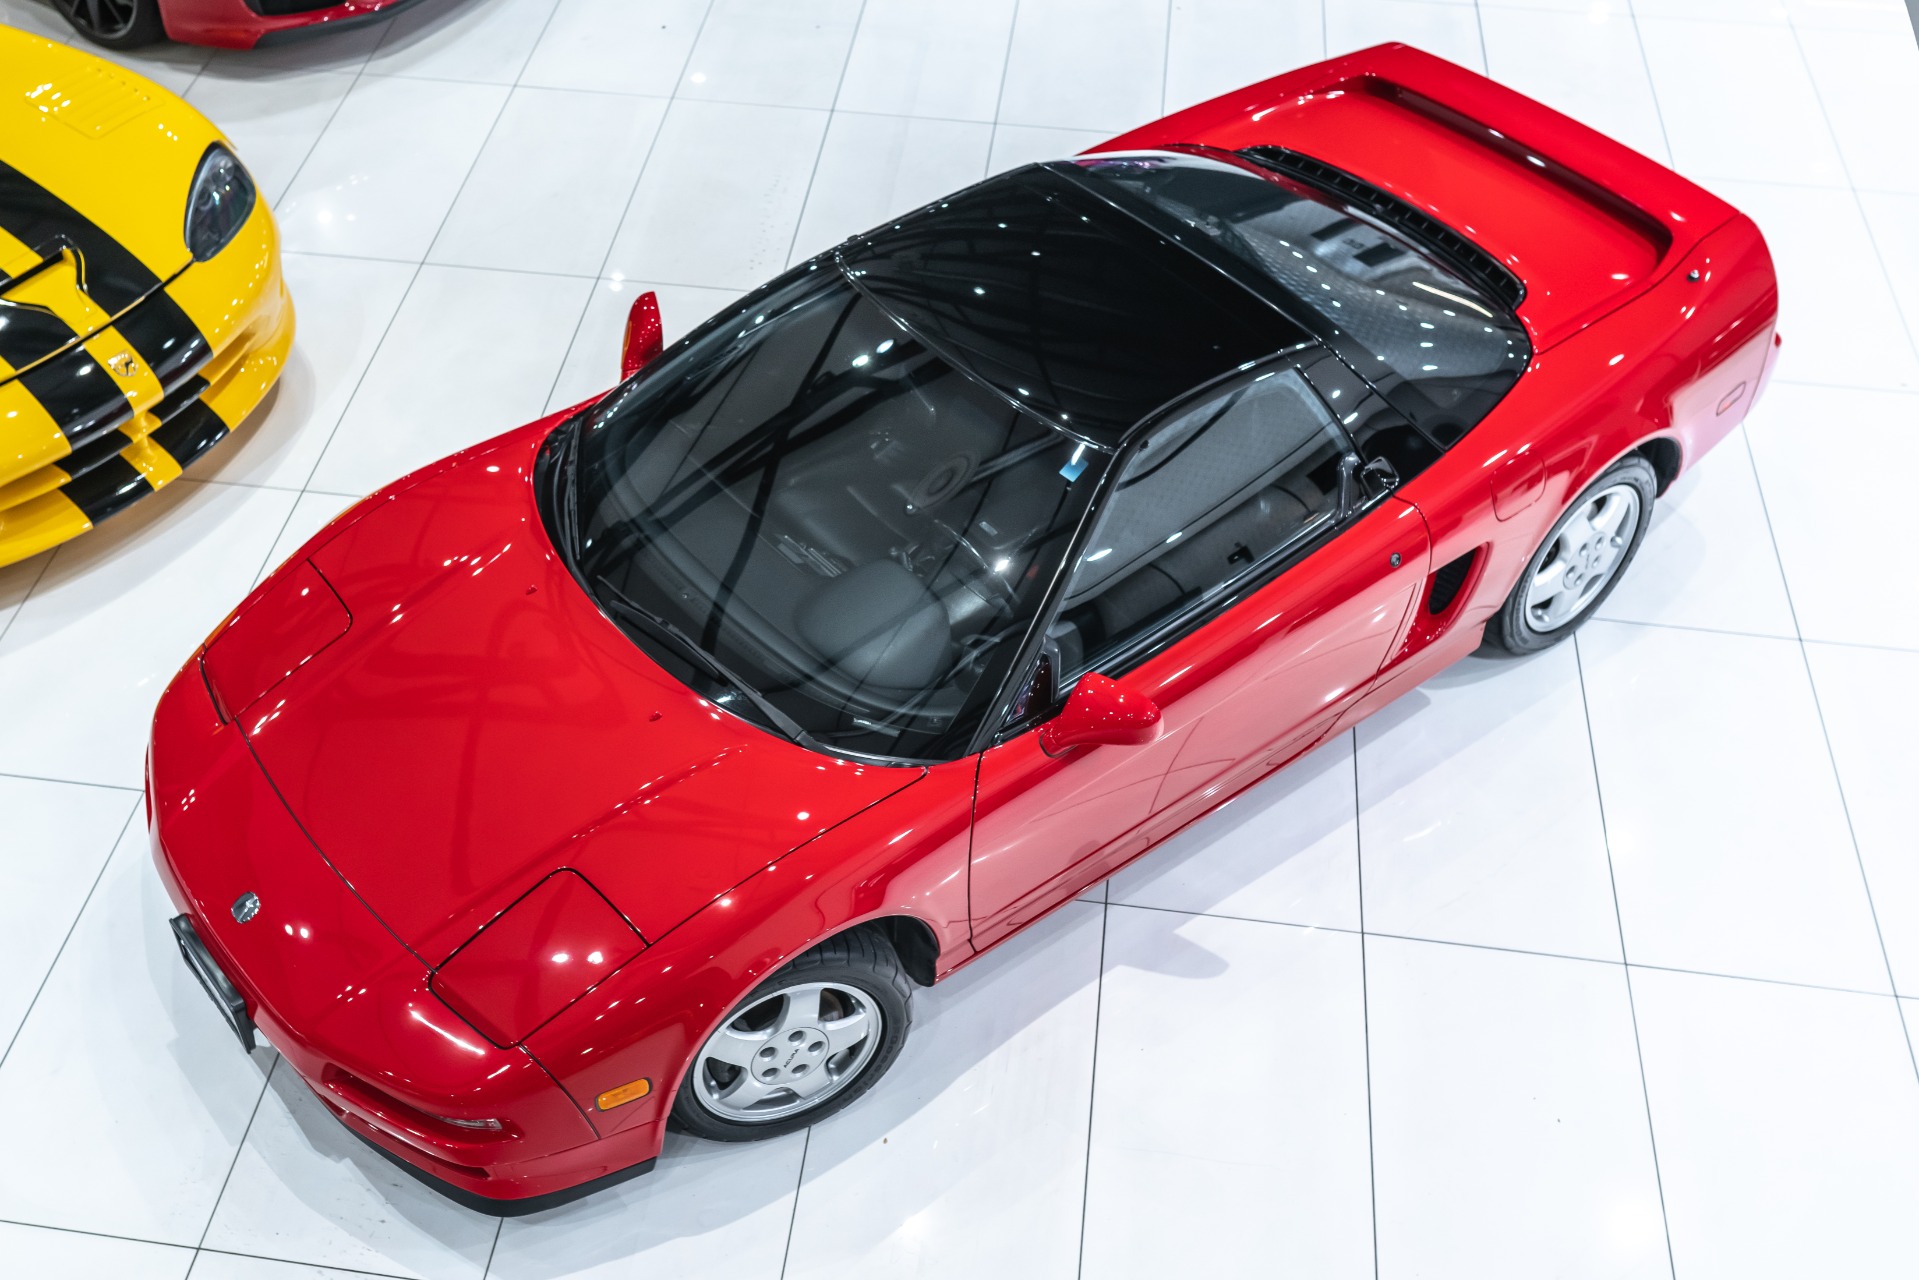 Used-1991-Acura-NSX-Only-25k-Miles-5-Speed-Manual-Collector-Quality-Very-Well-Documented